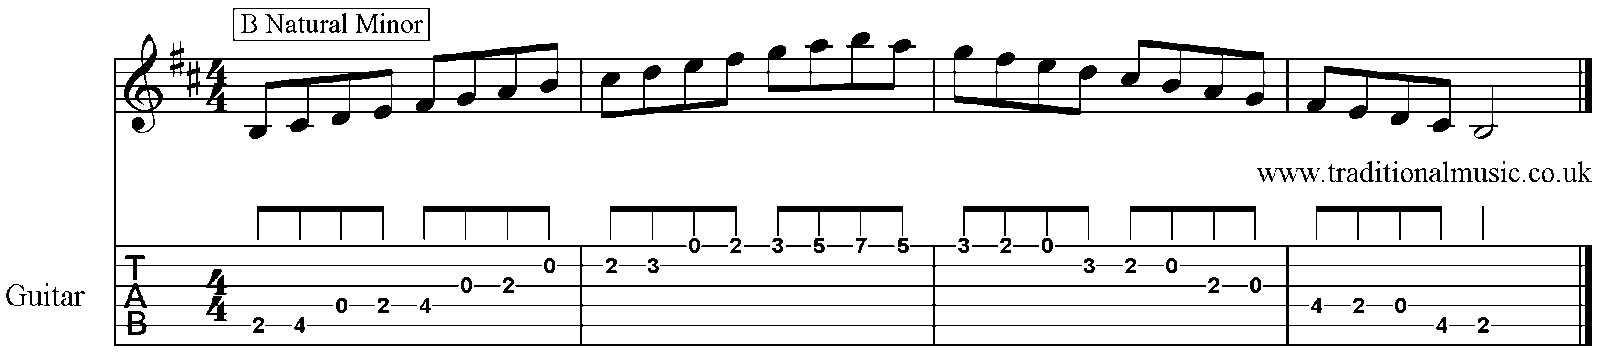 Minor Scales for Guitar B 